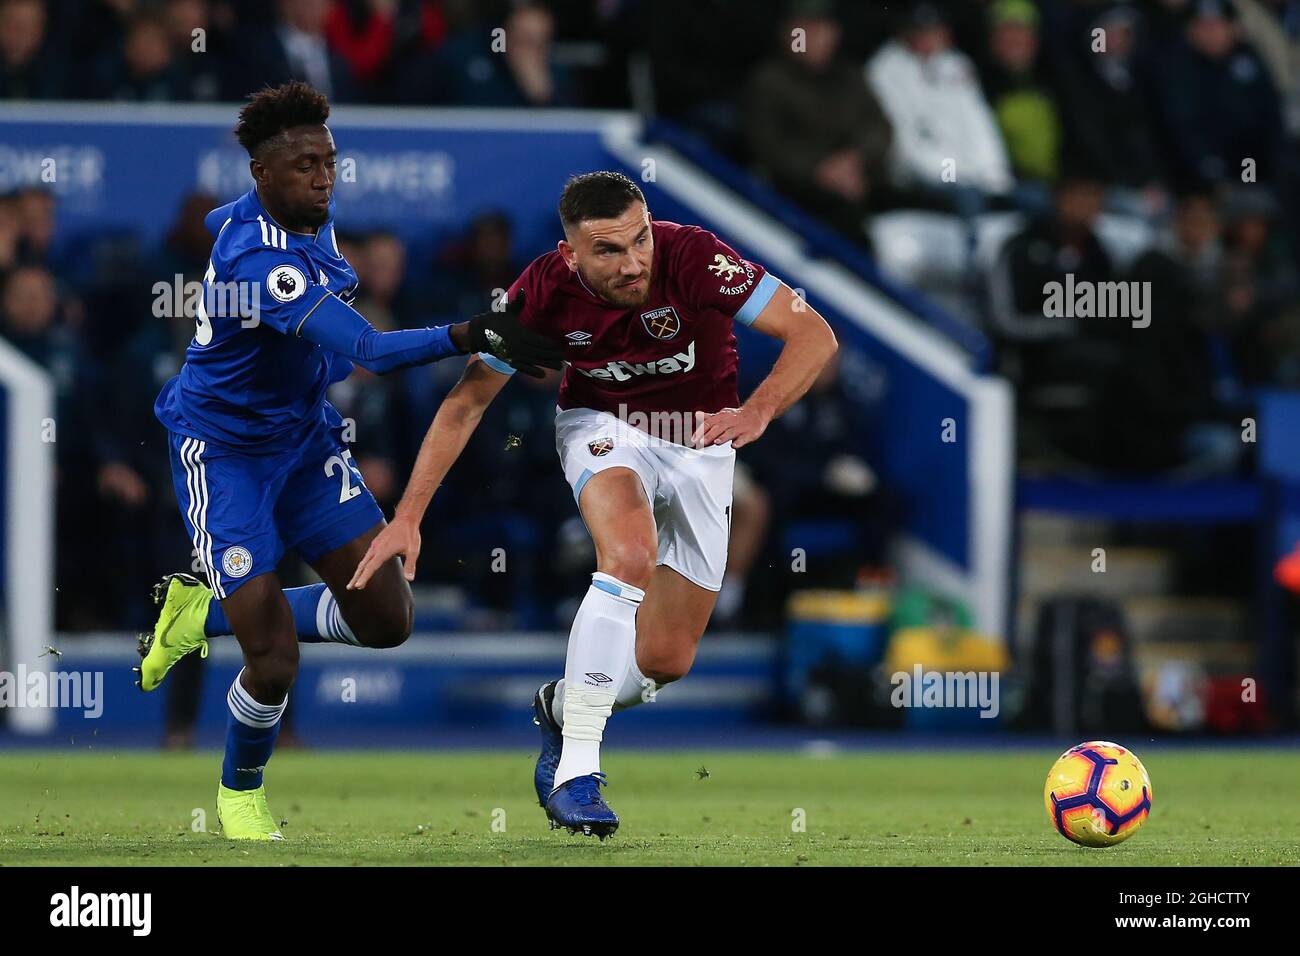 Robert Snodgrass (r) of West Ham United runs away from Wilfred Ndidi of Leicester City during the Premier League match at the King Power Stadium, Leicester. Picture date: 27th October 2018. Picture credit should read: James Wilson/Sportimage via PA Images Stock Photo